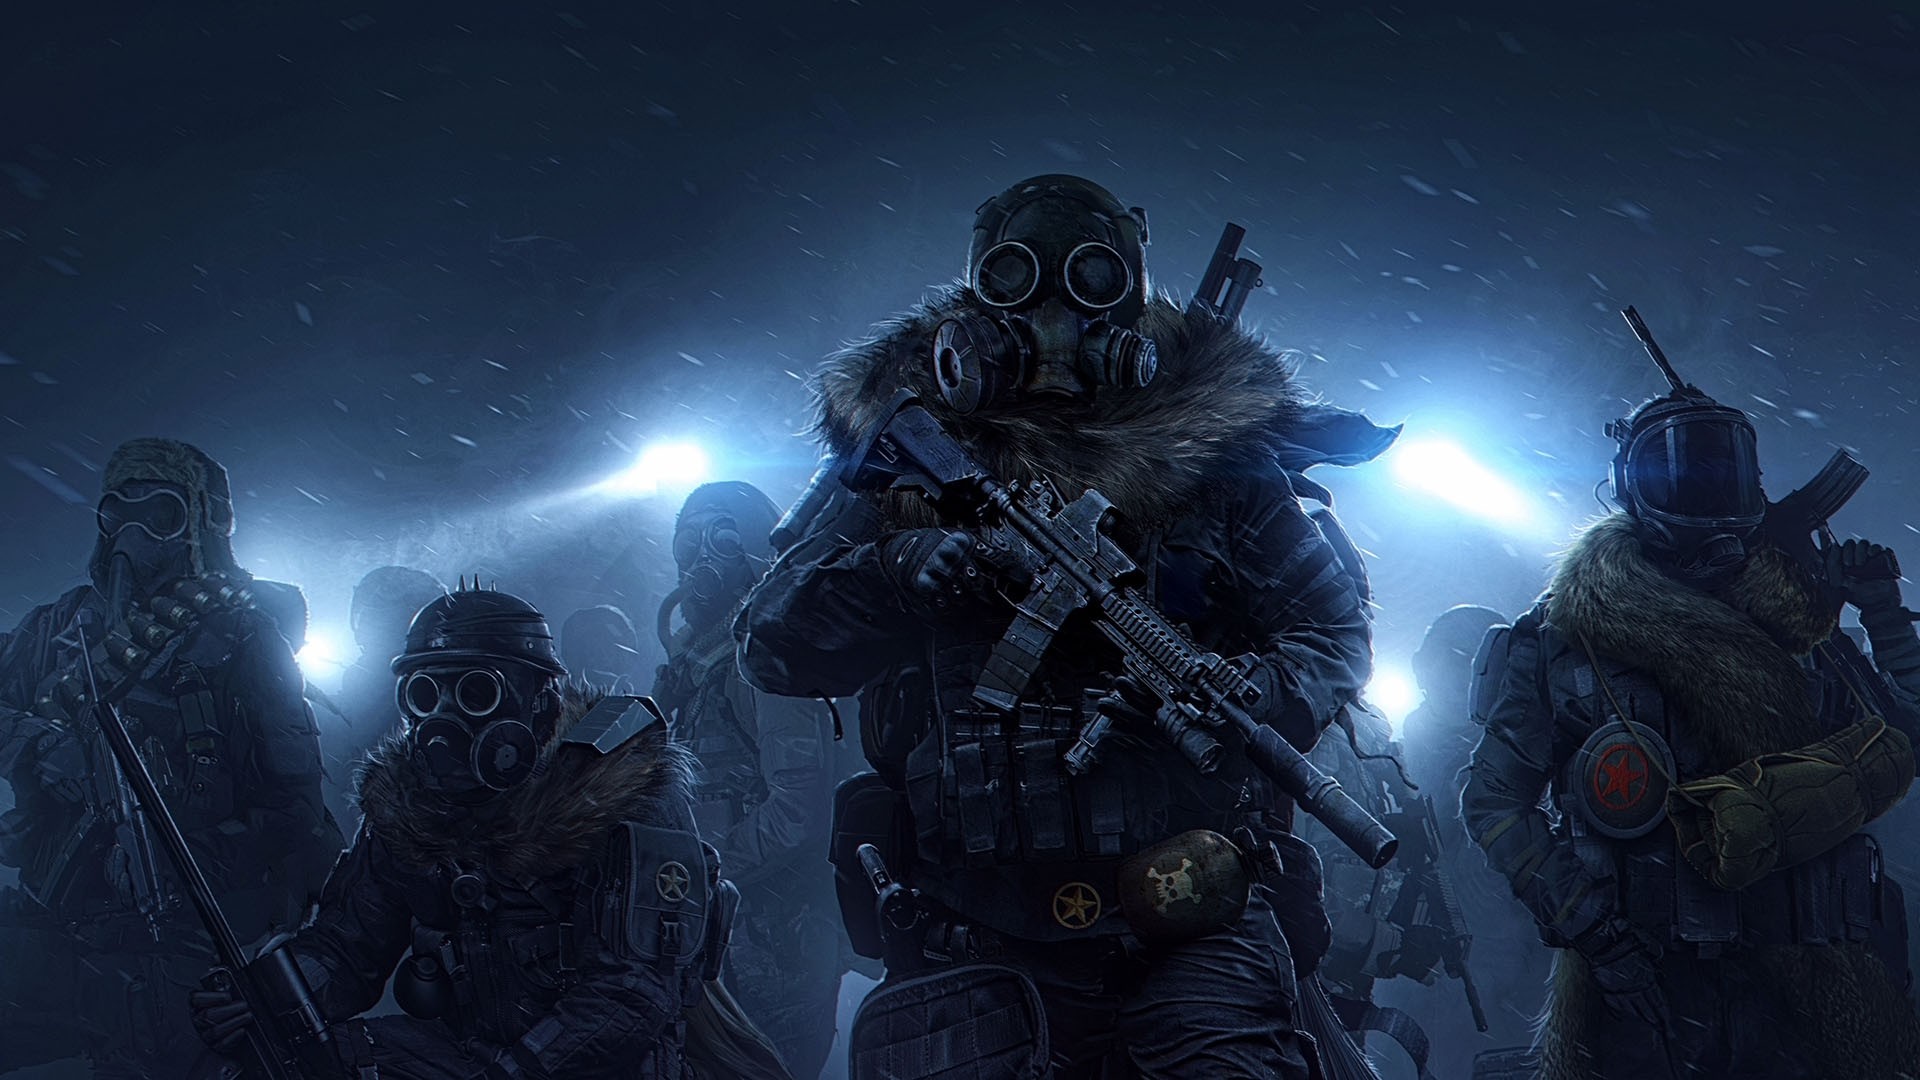 Preview: Wasteland 3 - Some of the Best Tactical Combat Available